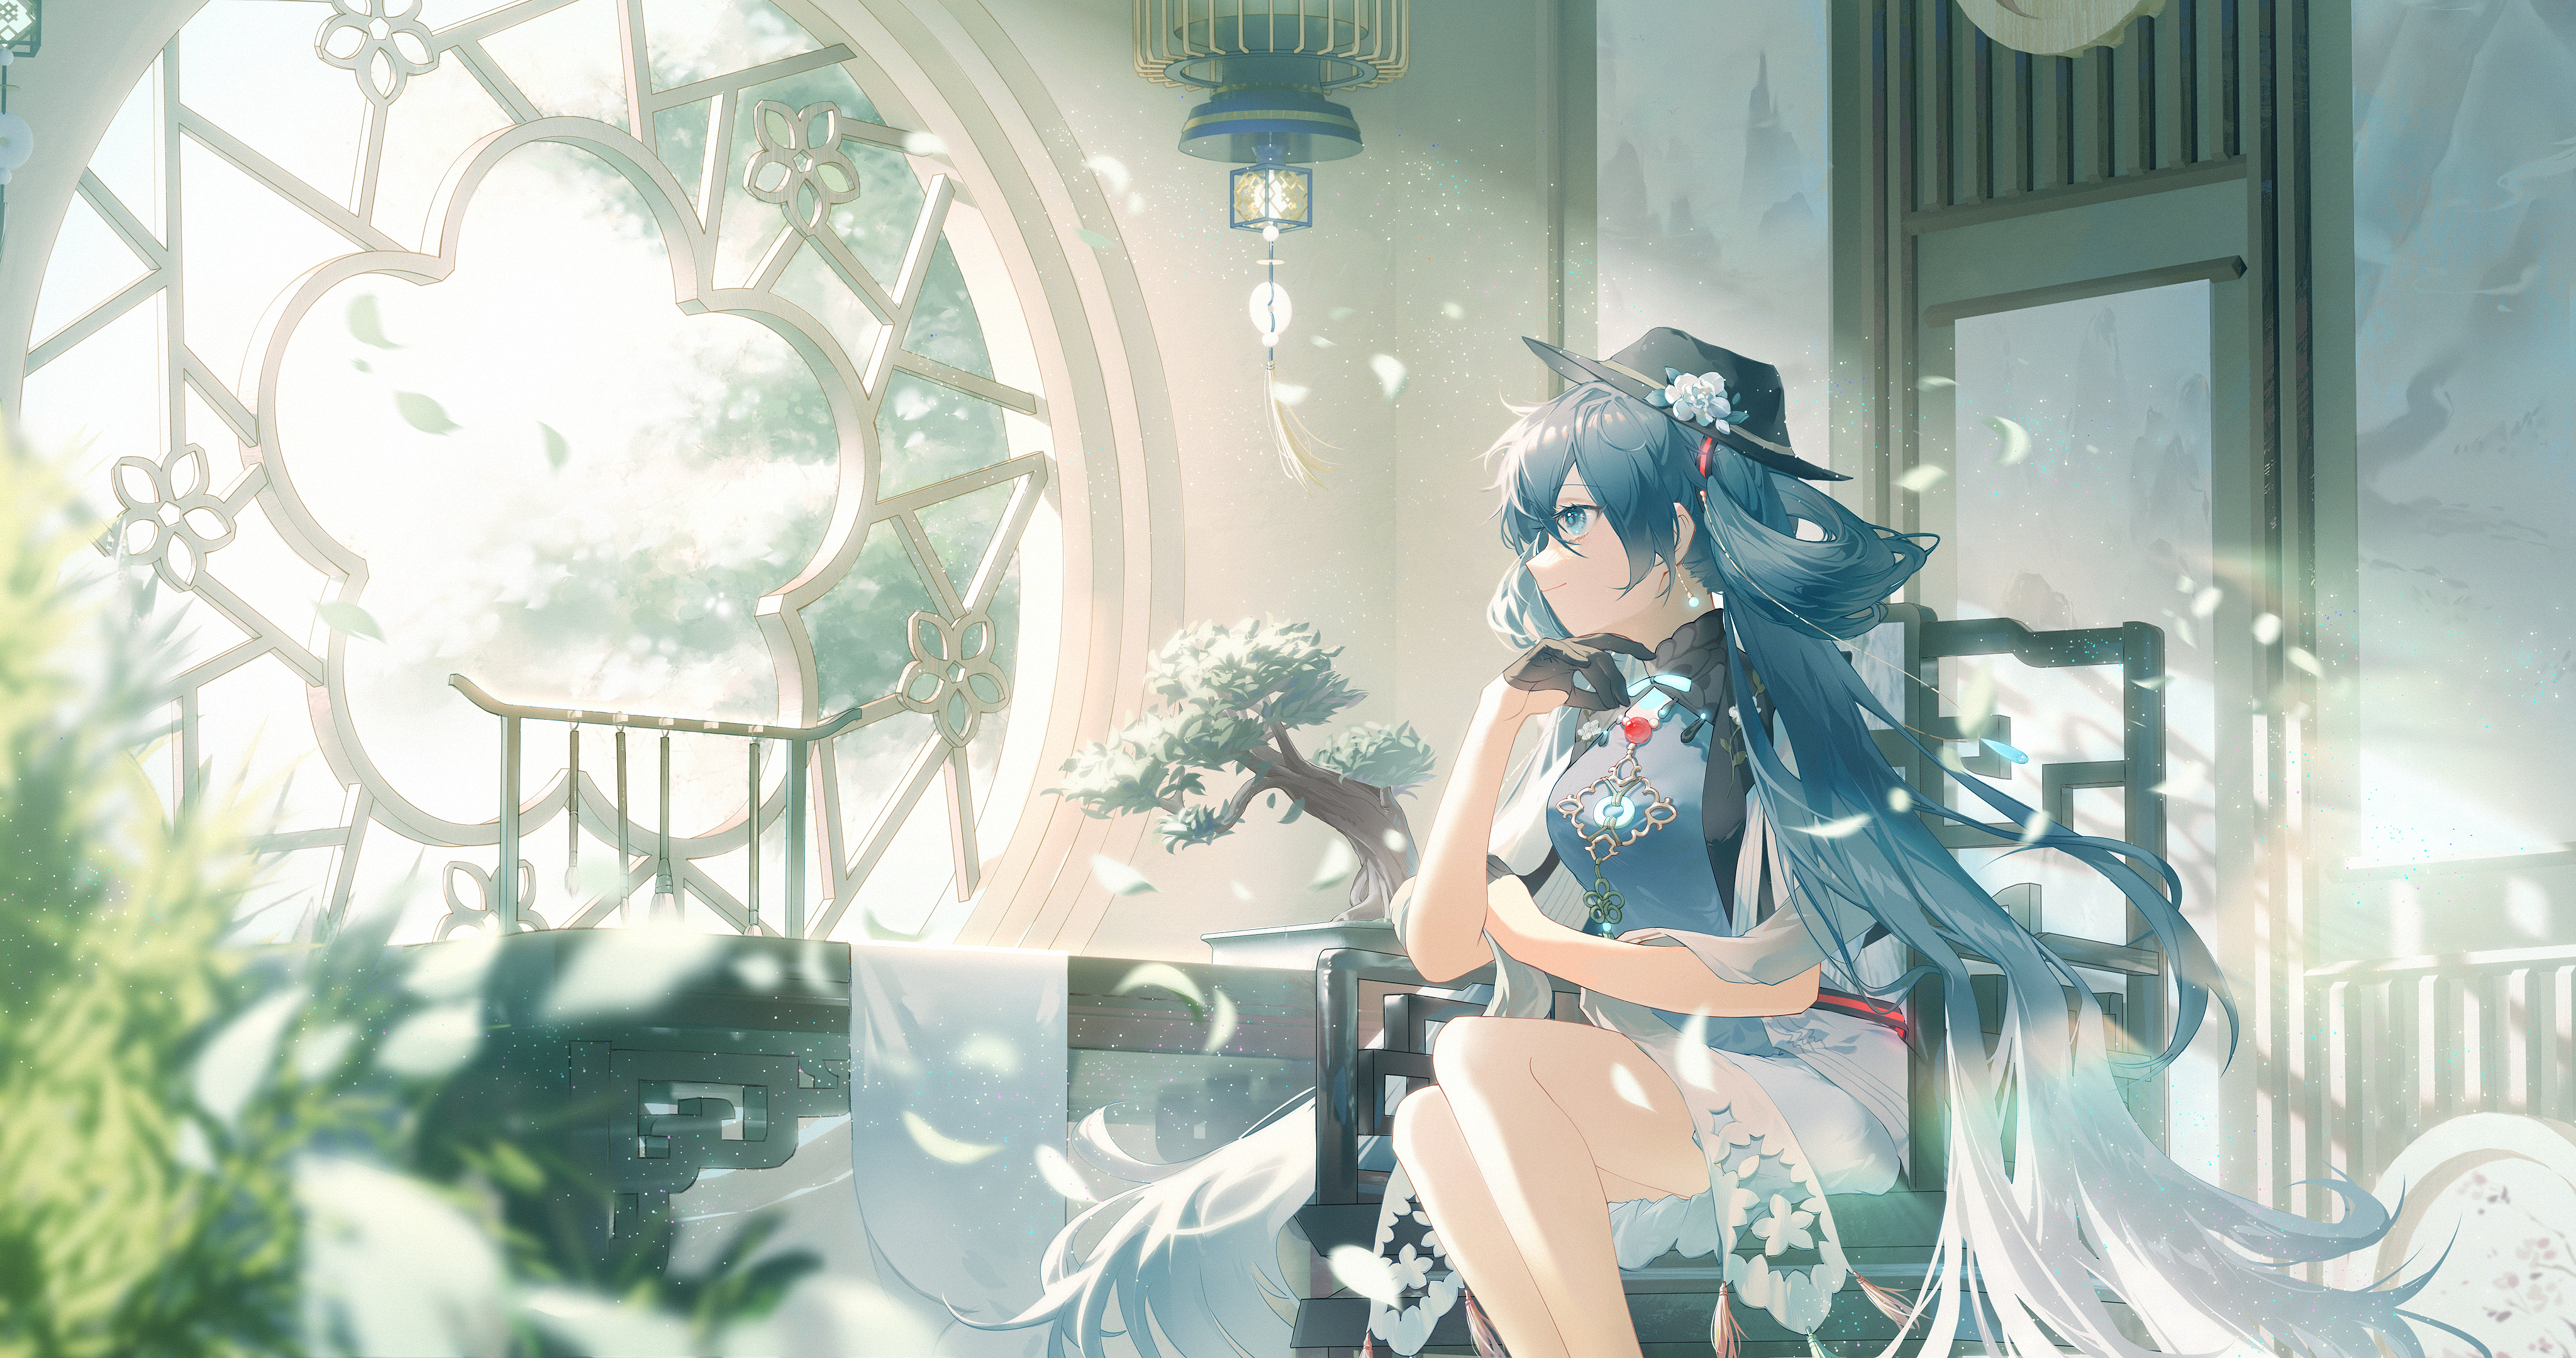 Anime 4096x2160 chinese clothing anime Hatsune Miku anime girls blue hair blue eyes looking away hat gloves window sunlight twintails leaves smiling